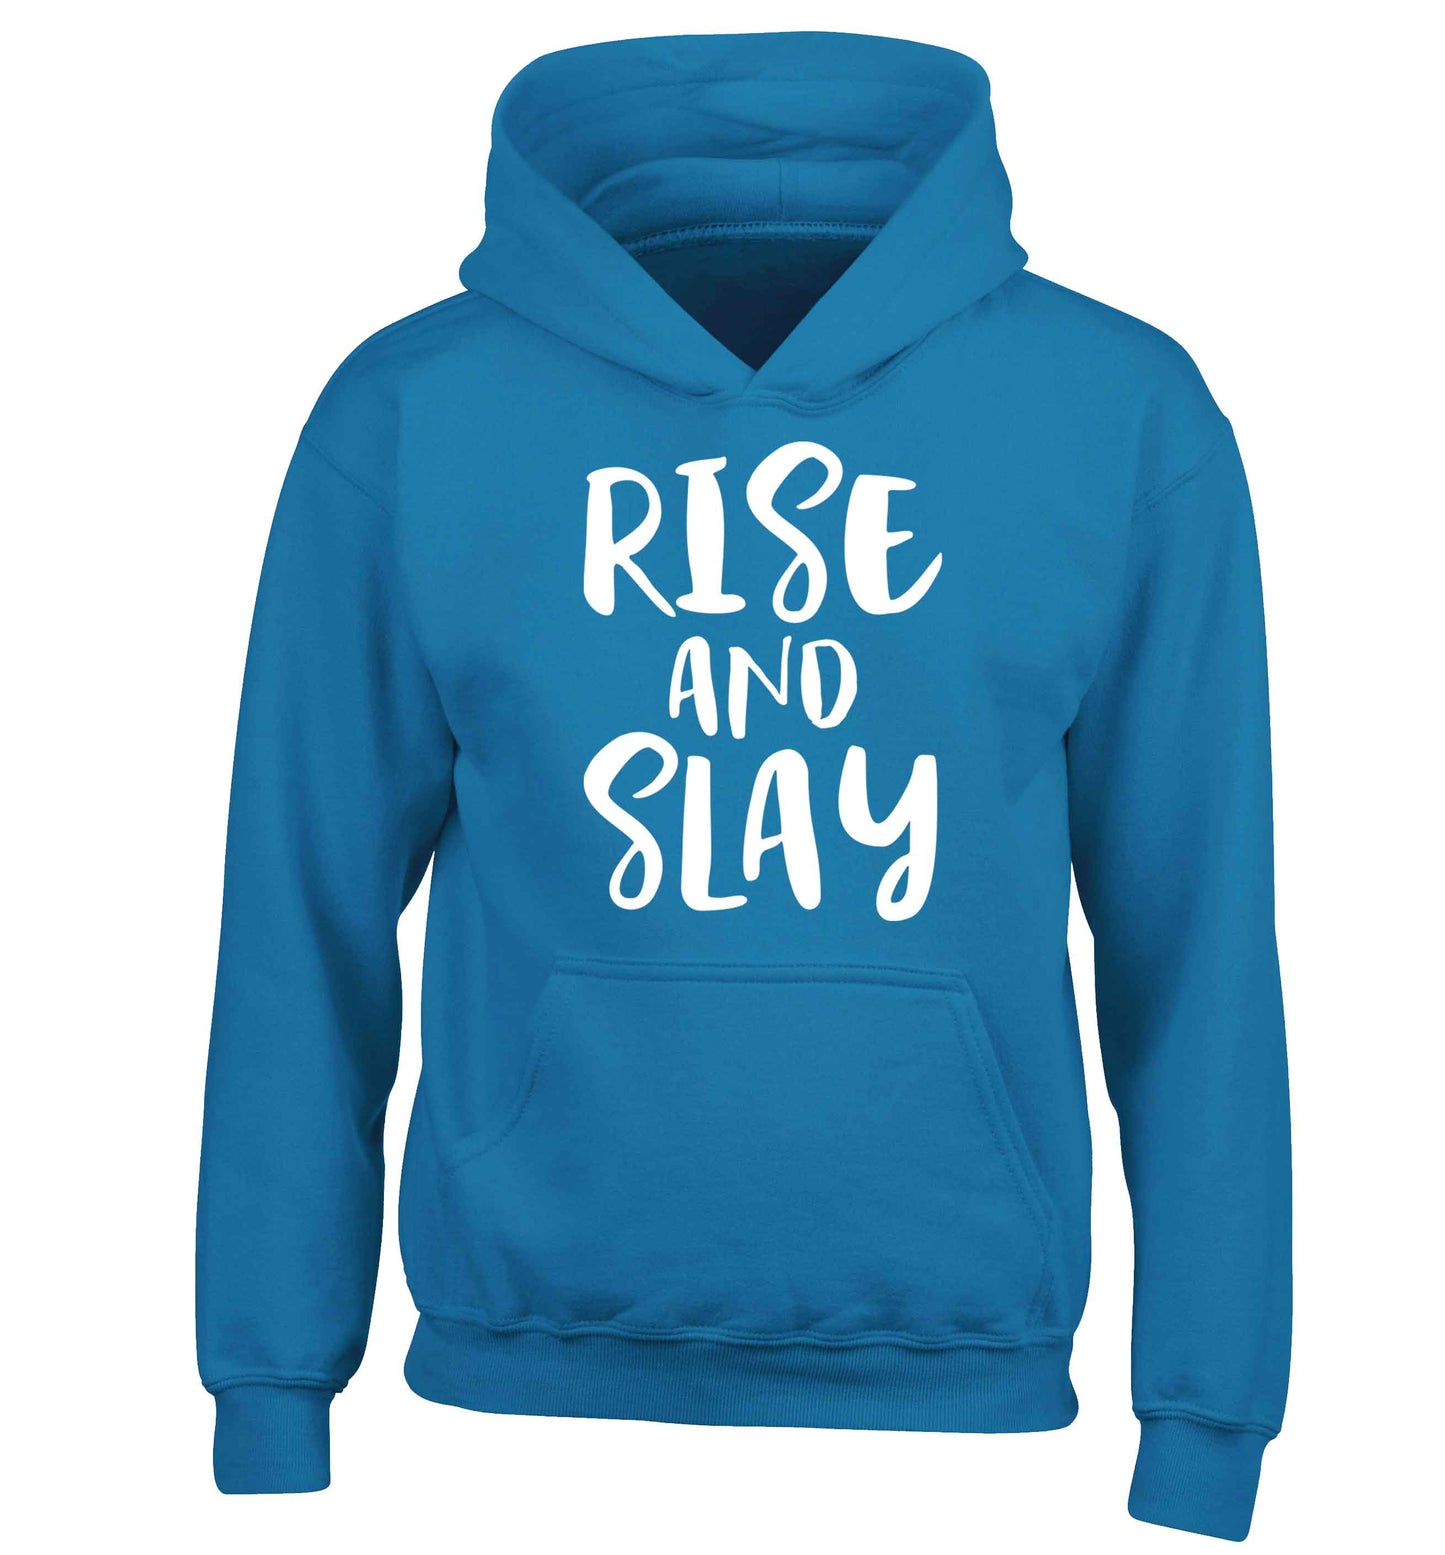 Rise and slay children's blue hoodie 12-13 Years